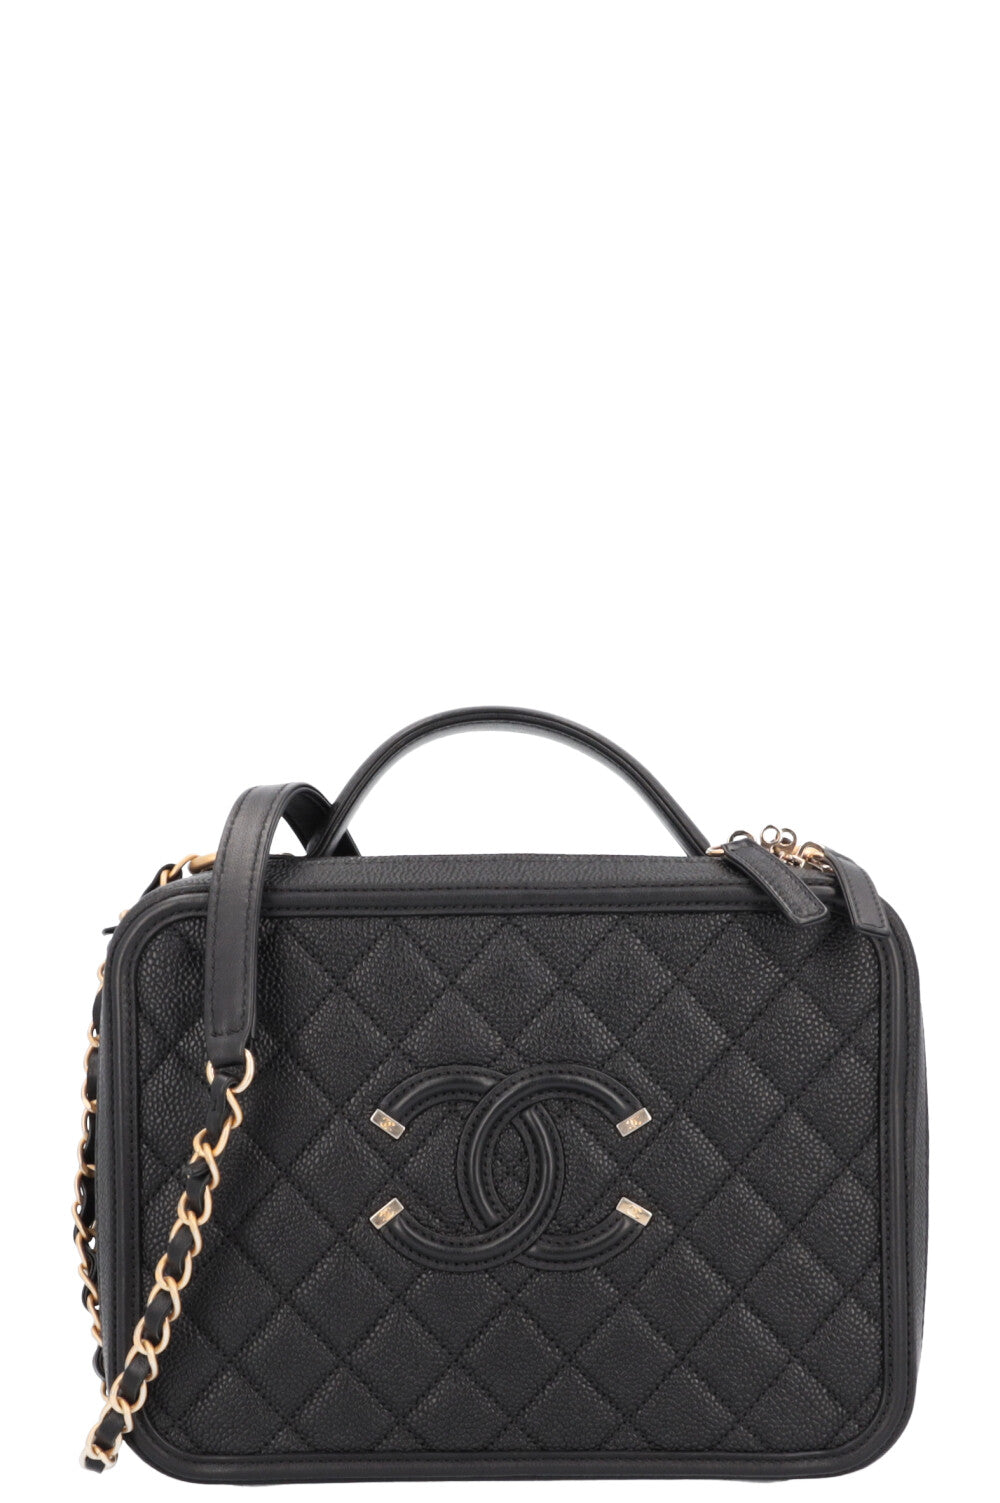 Chanel Black Quilted Caviar Small Filigree CC Vanity Case - Chanel